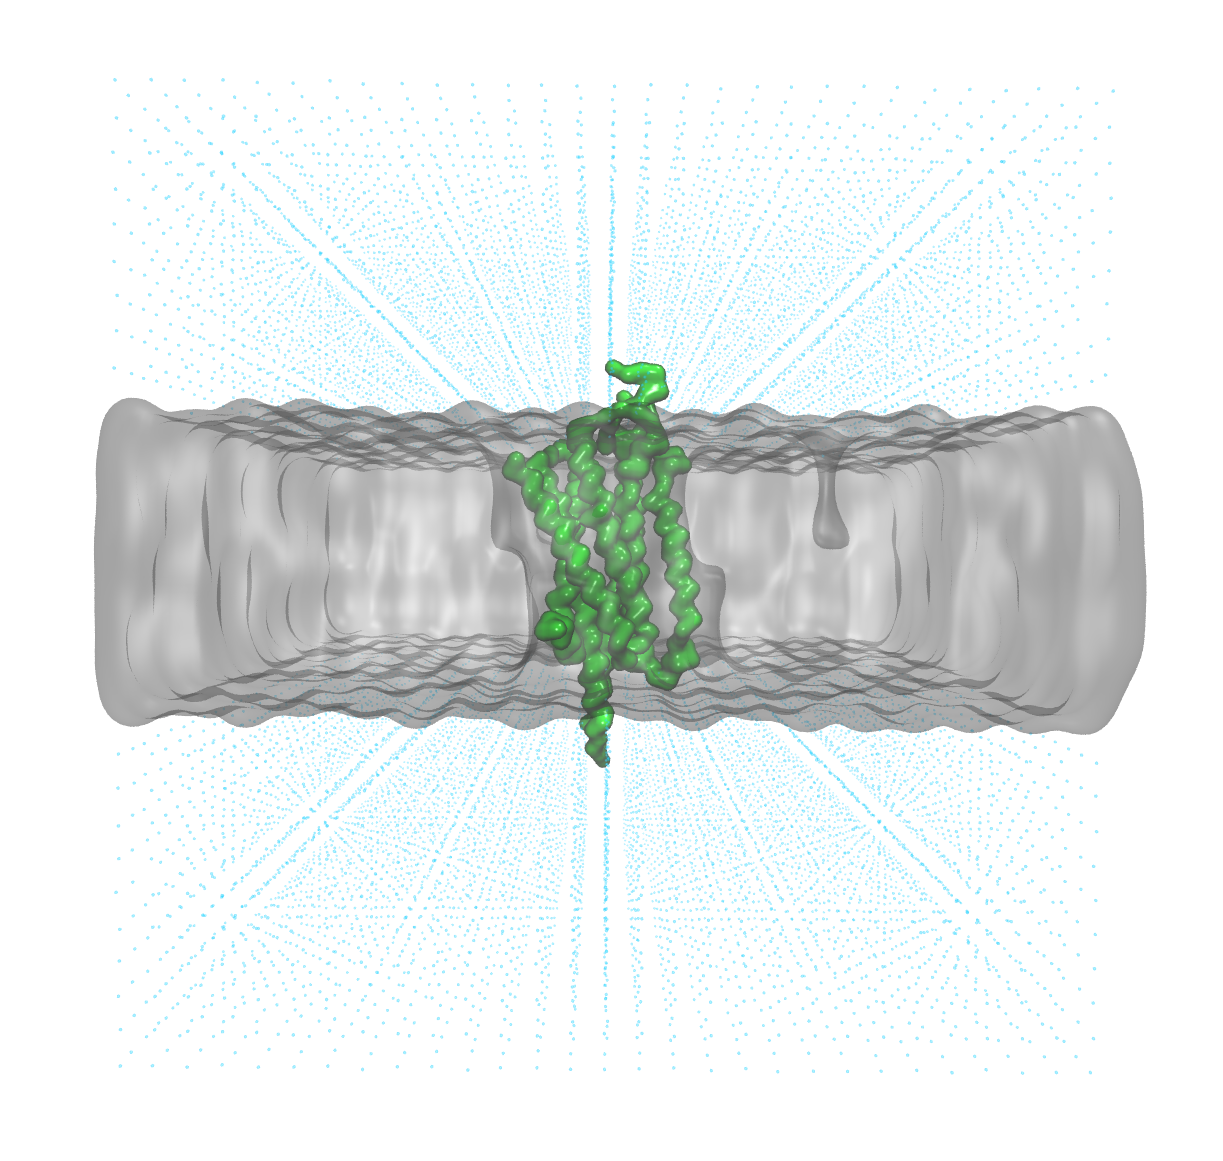  Coarse-grained representation of a GPCR embedded in a membrane shown in VMD